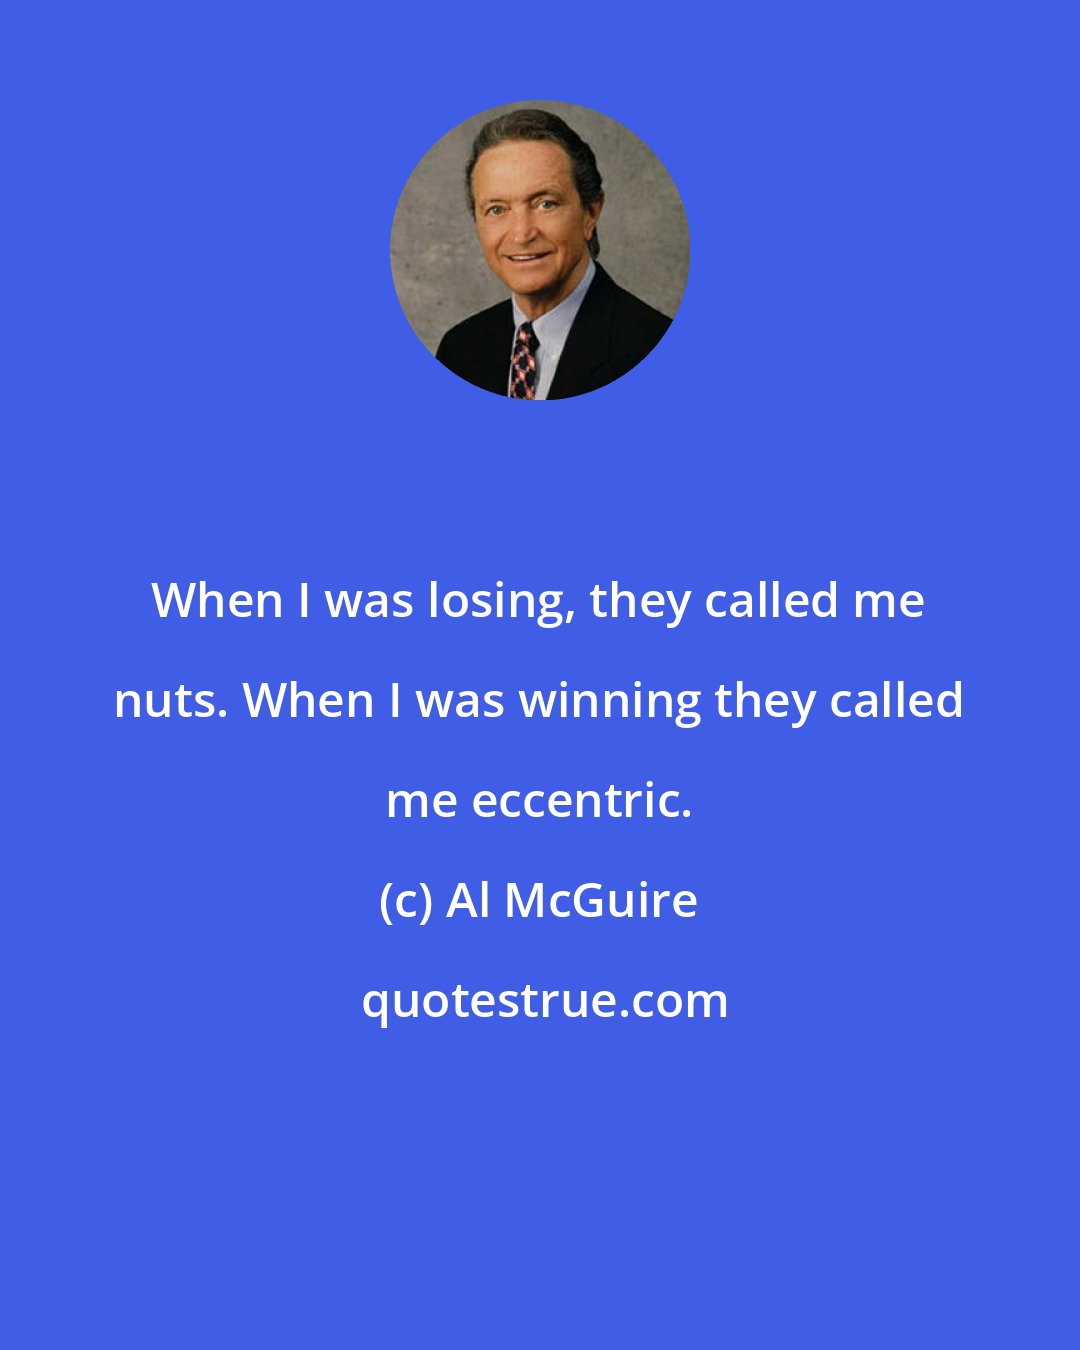 Al McGuire: When I was losing, they called me nuts. When I was winning they called me eccentric.